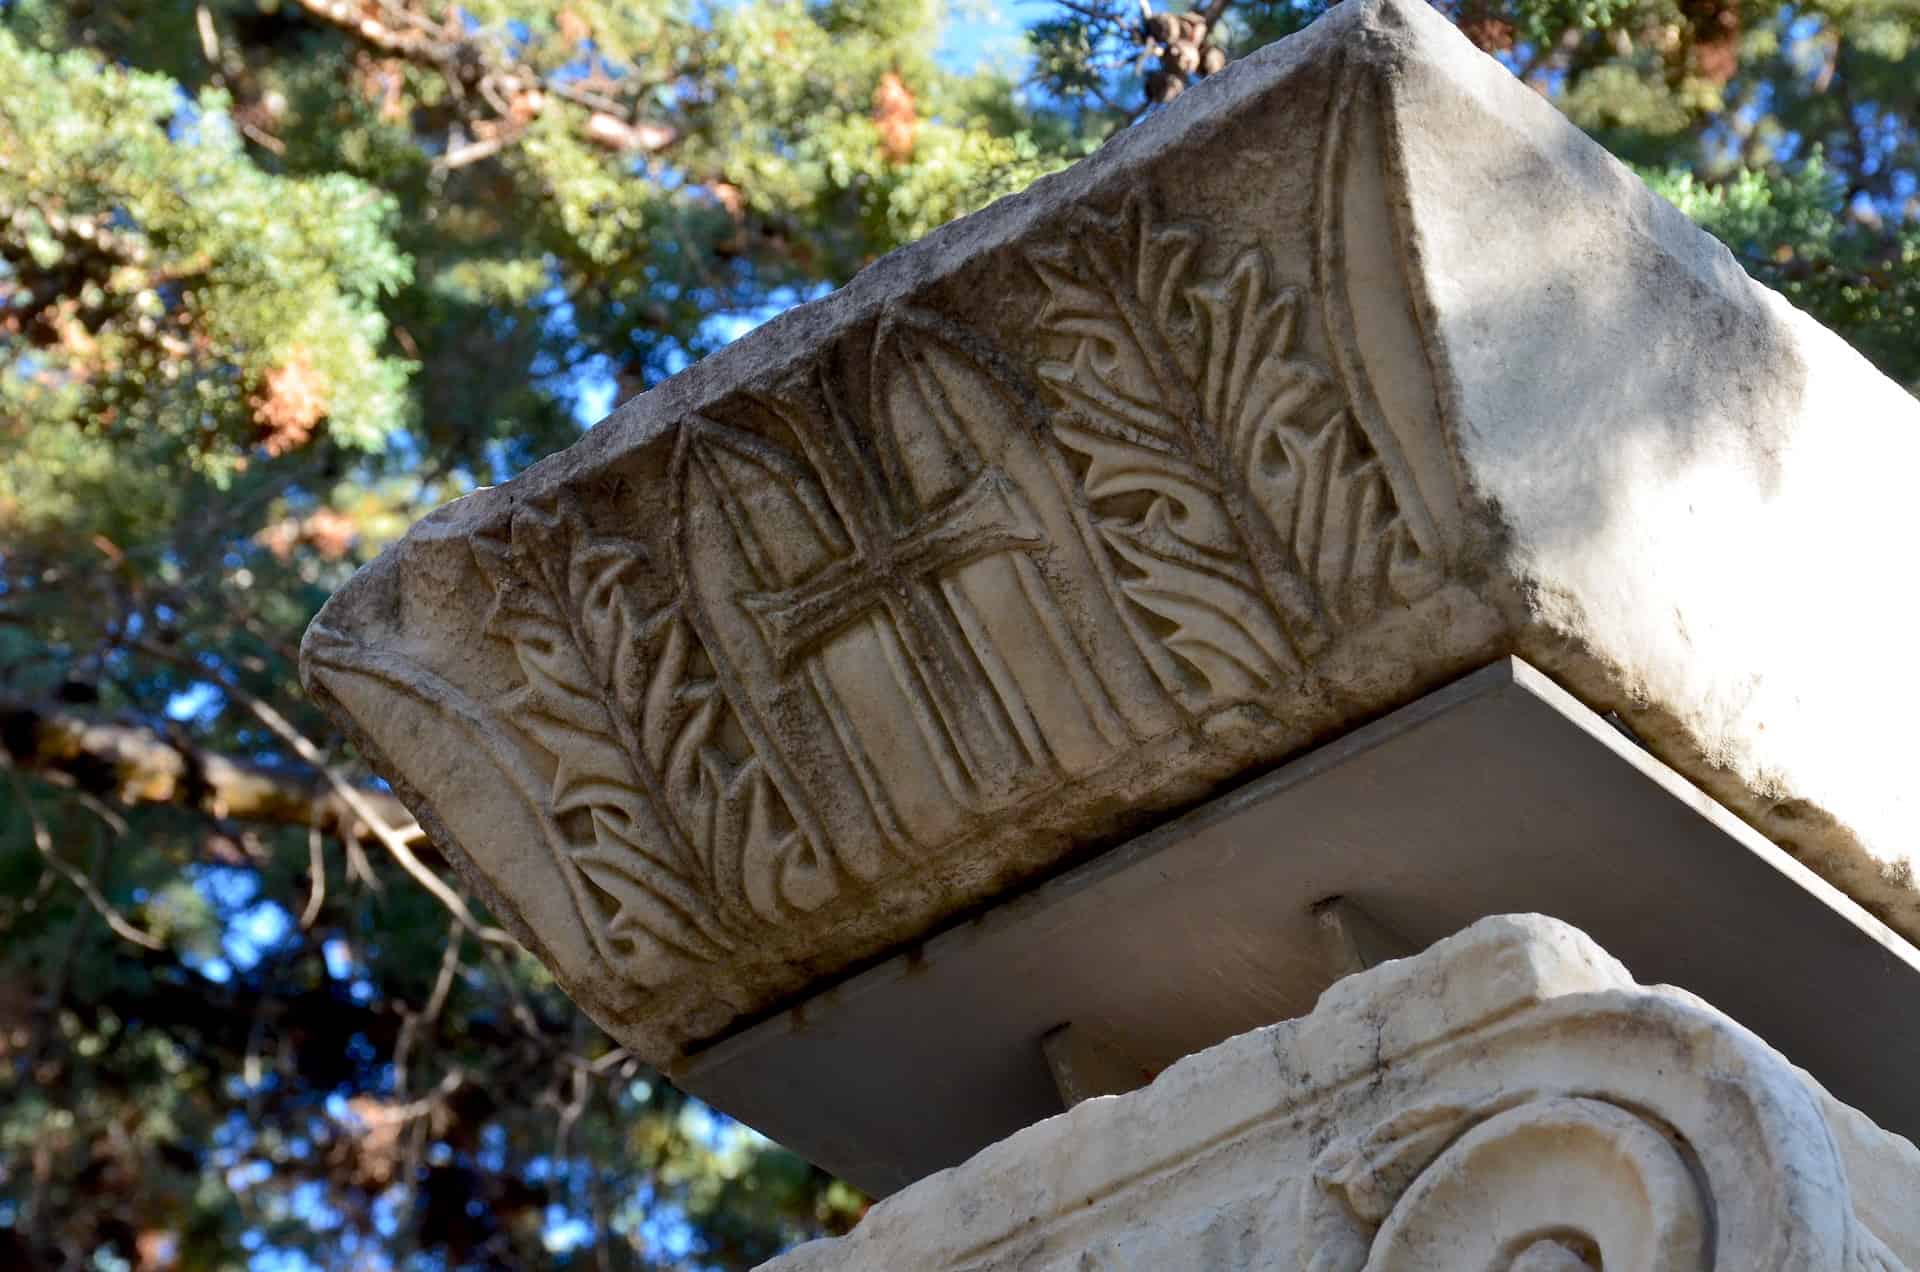 5th century column capital in the Byzantine Church in the Paradise exhibit in the gardens at Villa Ilissia